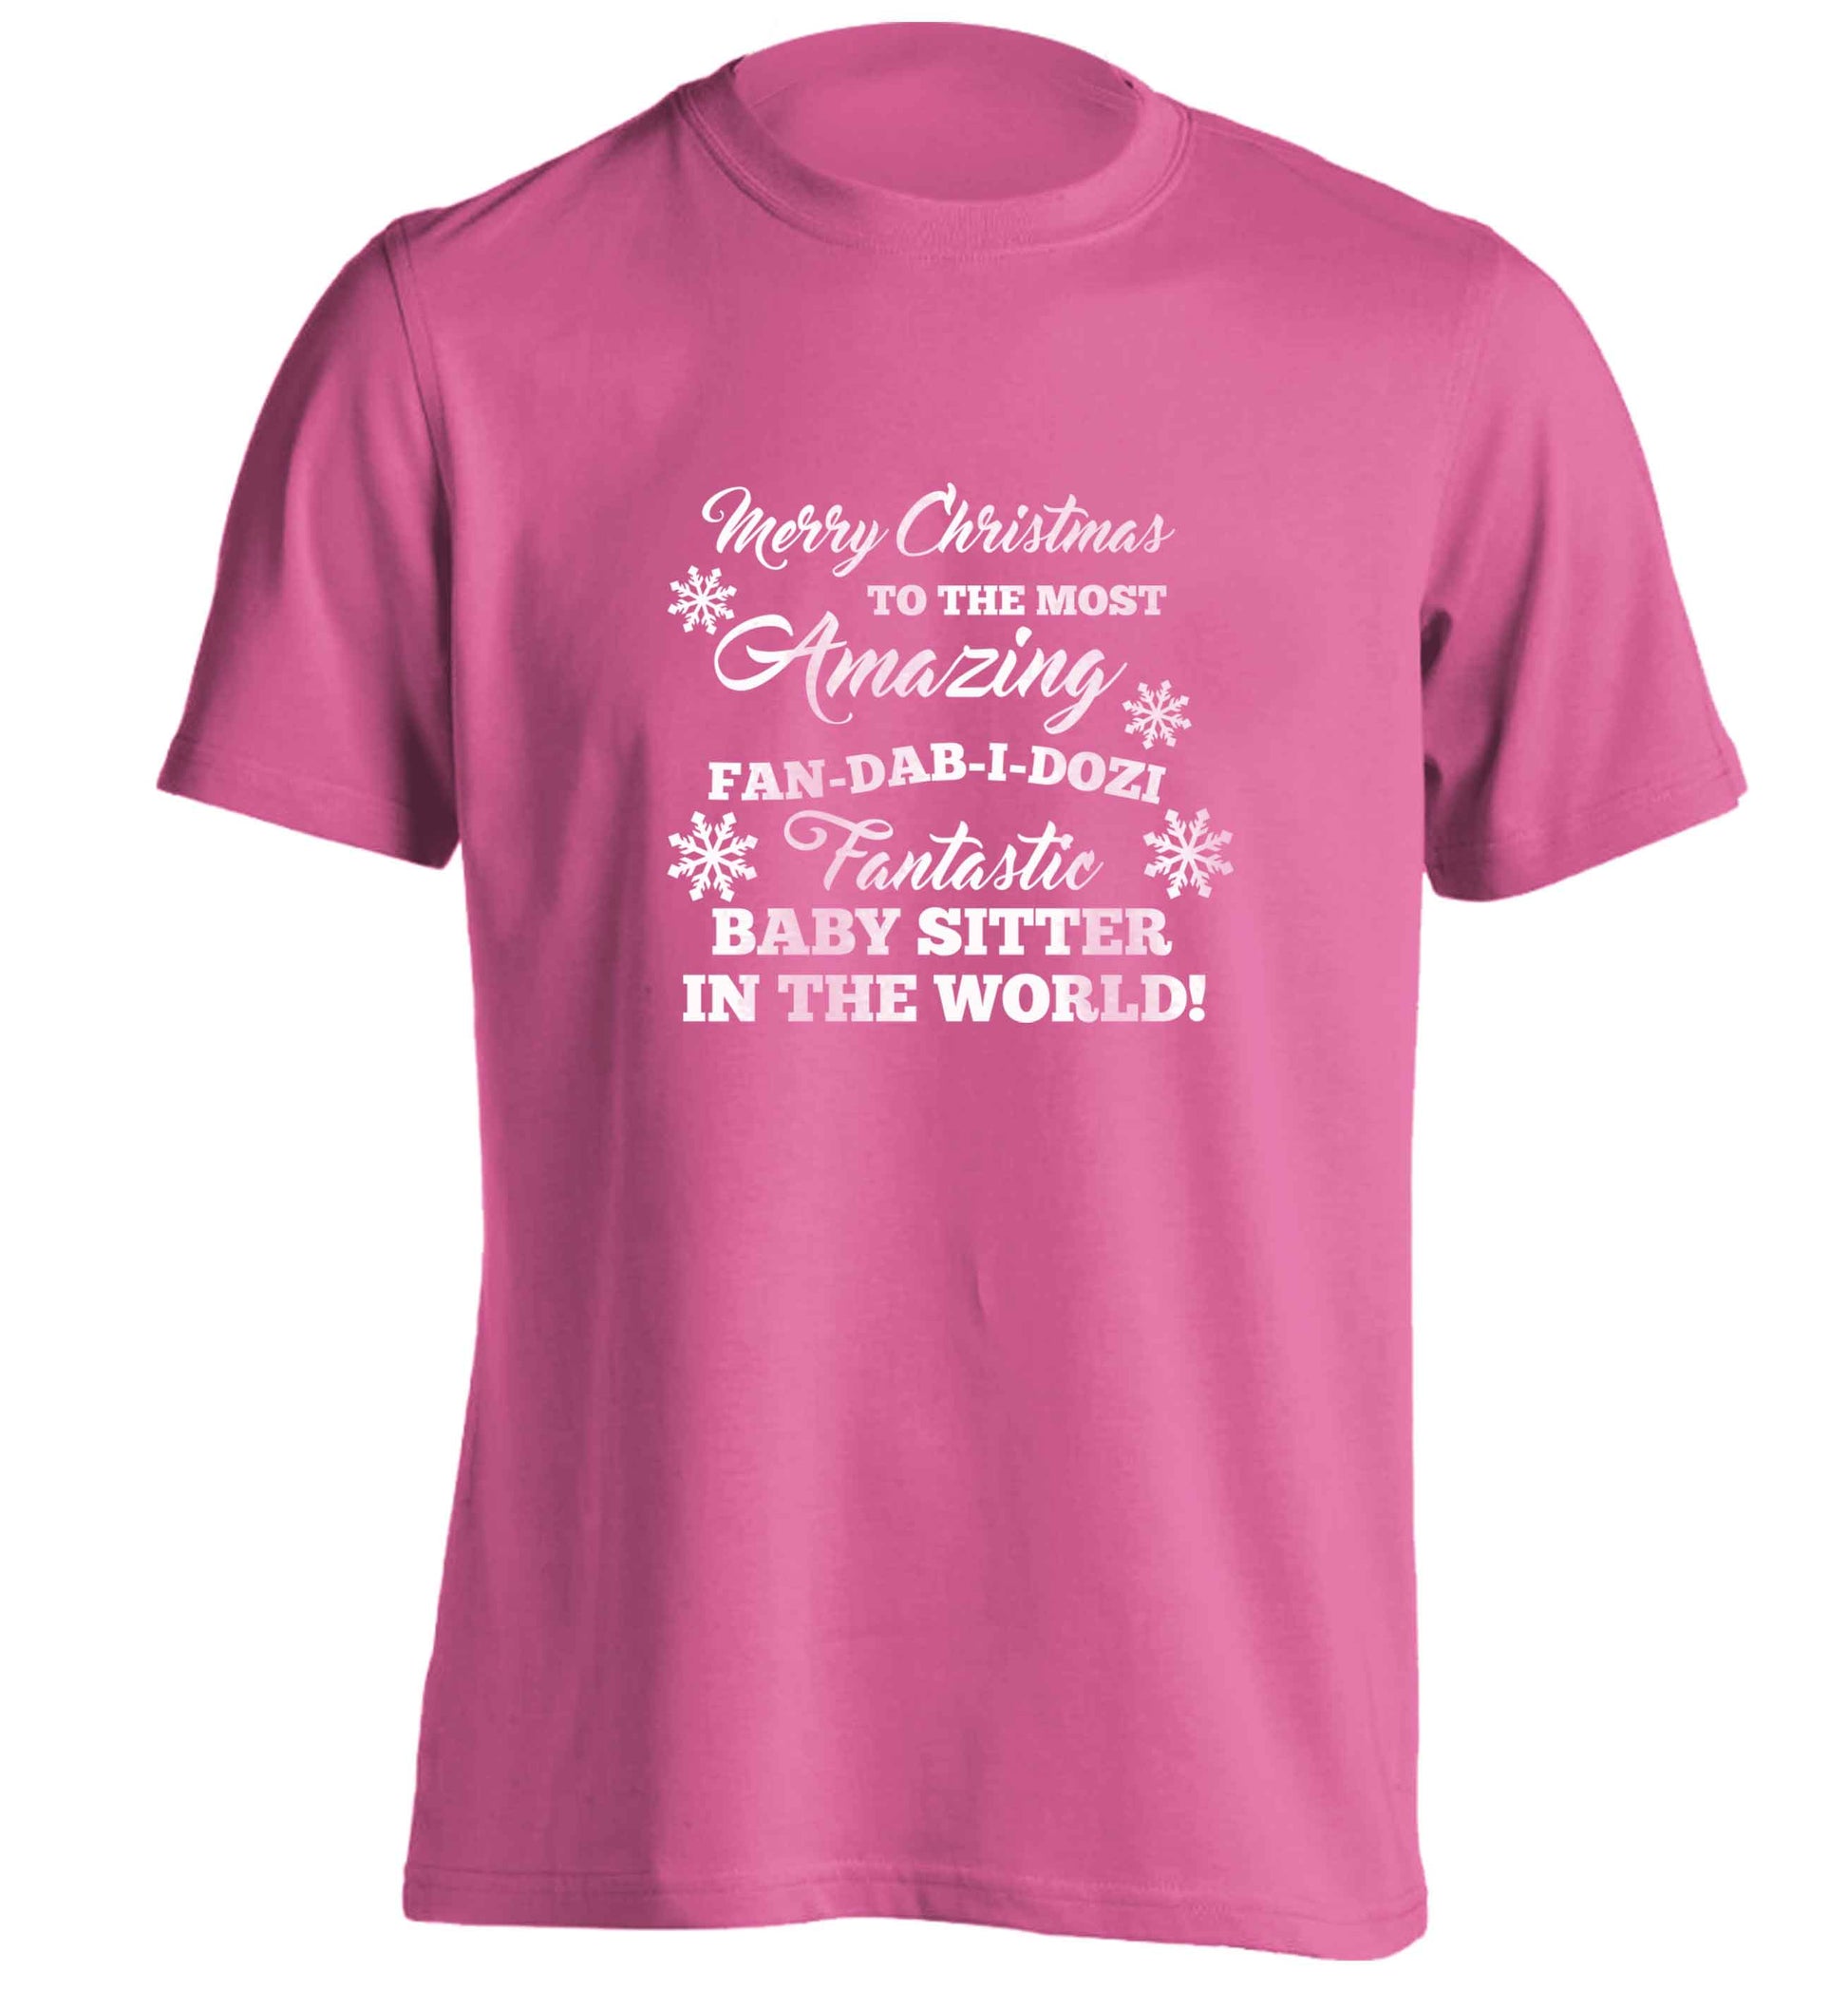 Merry Christmas to the most amazing fan-dab-i-dozi fantasic baby sitter in the world adults unisex pink Tshirt 2XL